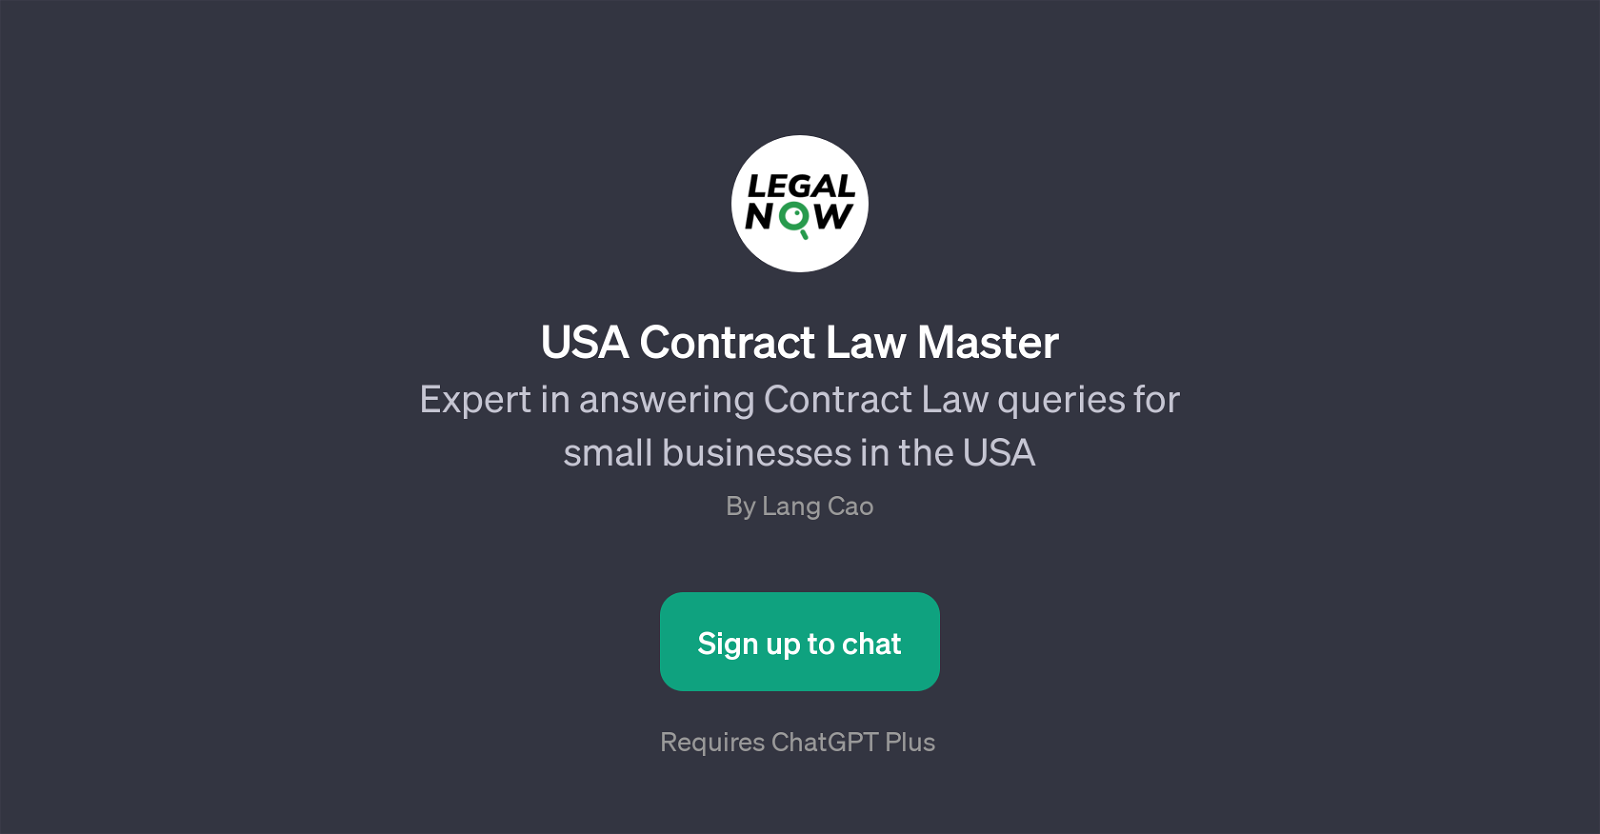 USA Contract Law Master website